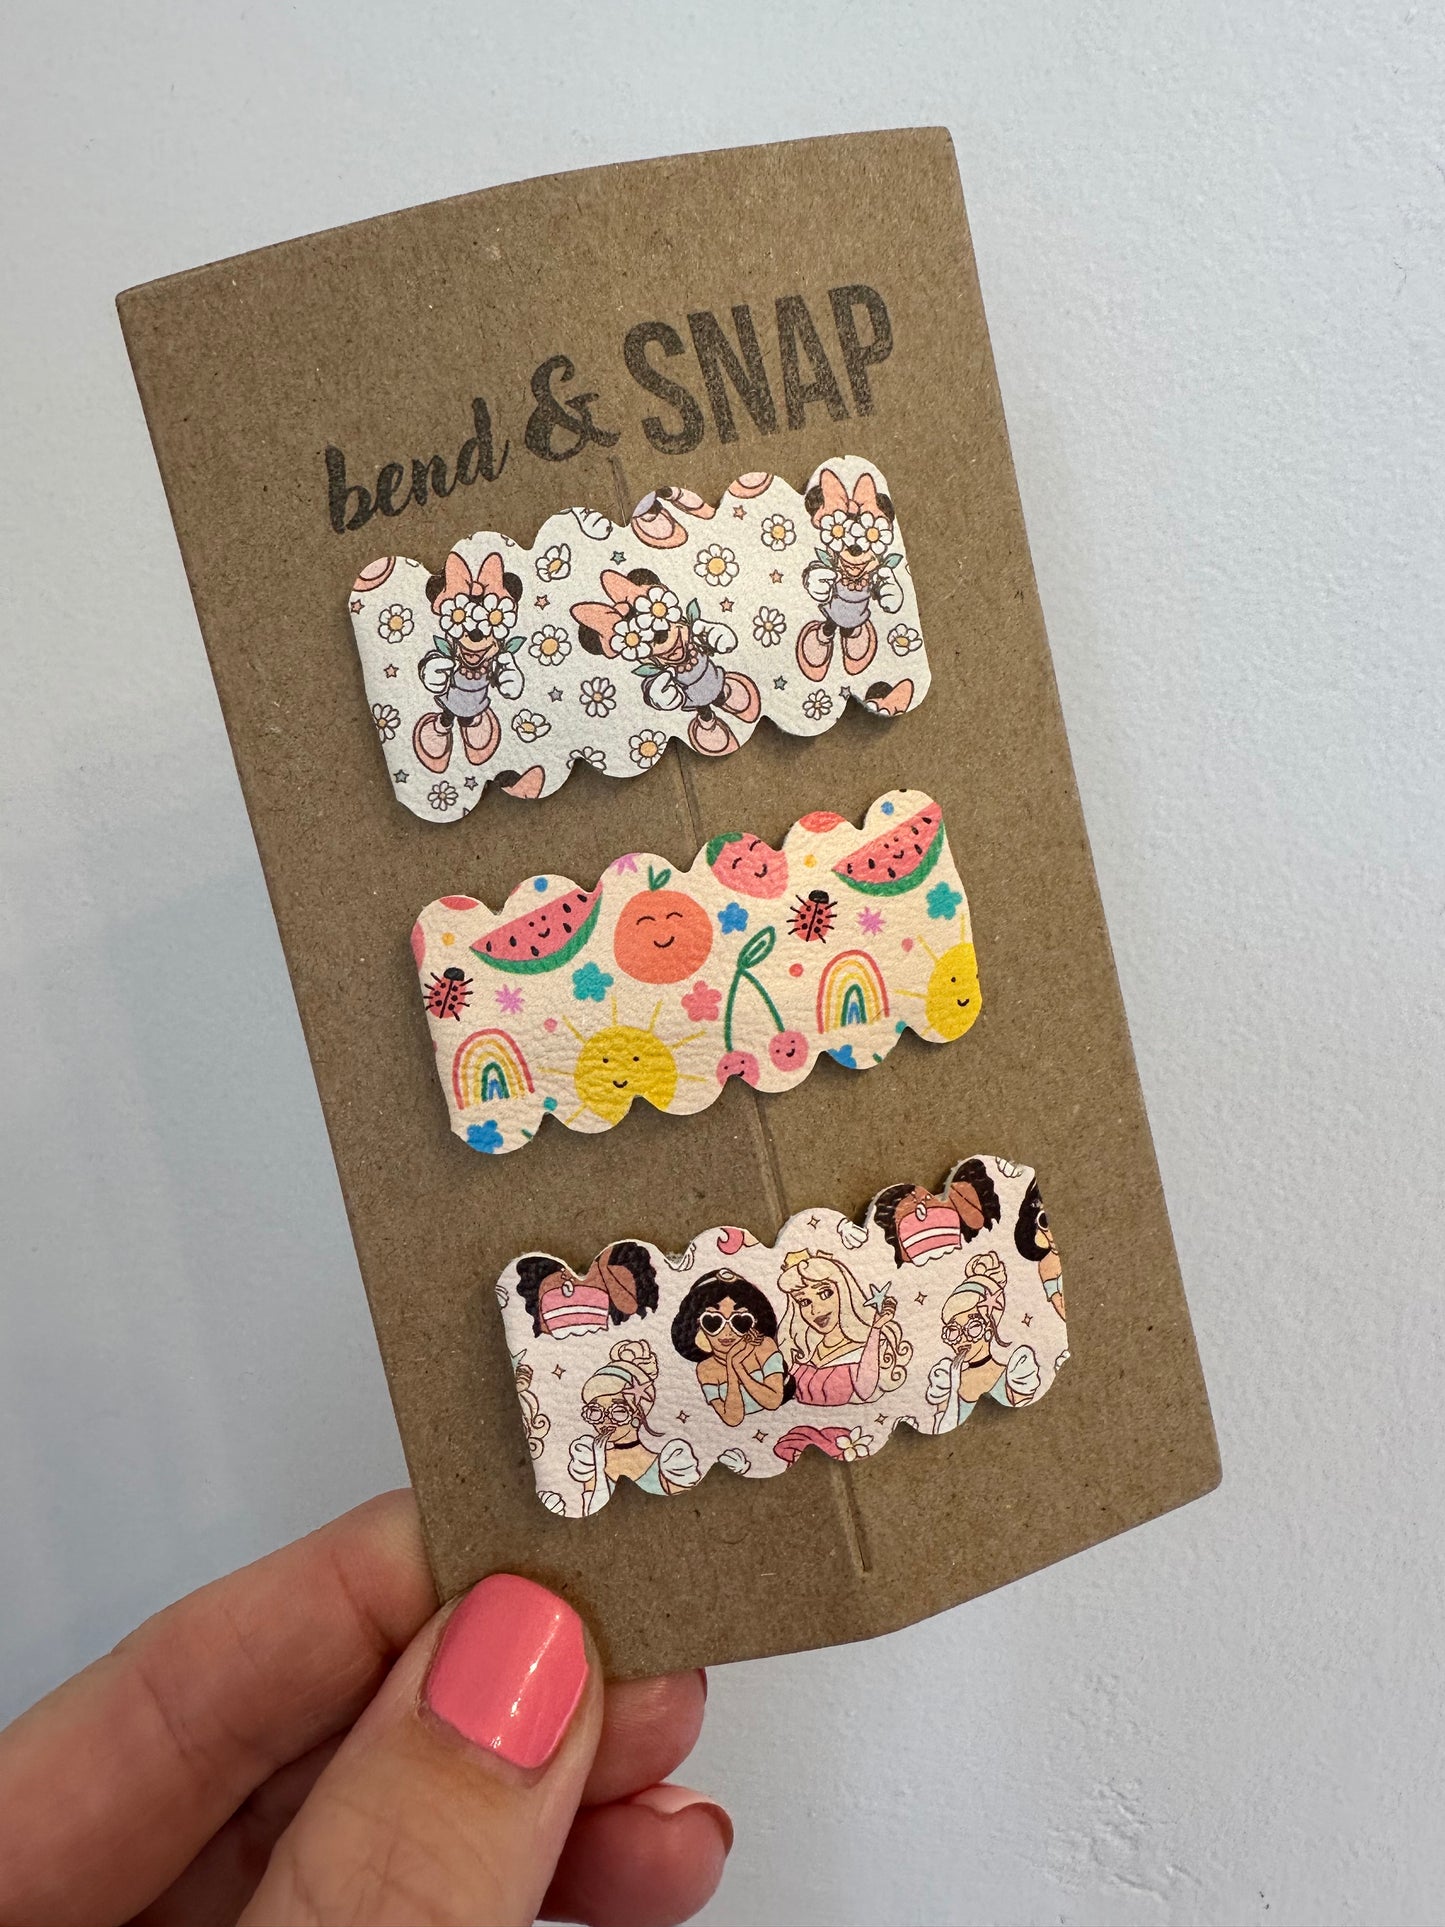 Bend & Snap 3 Pack Snap Clips